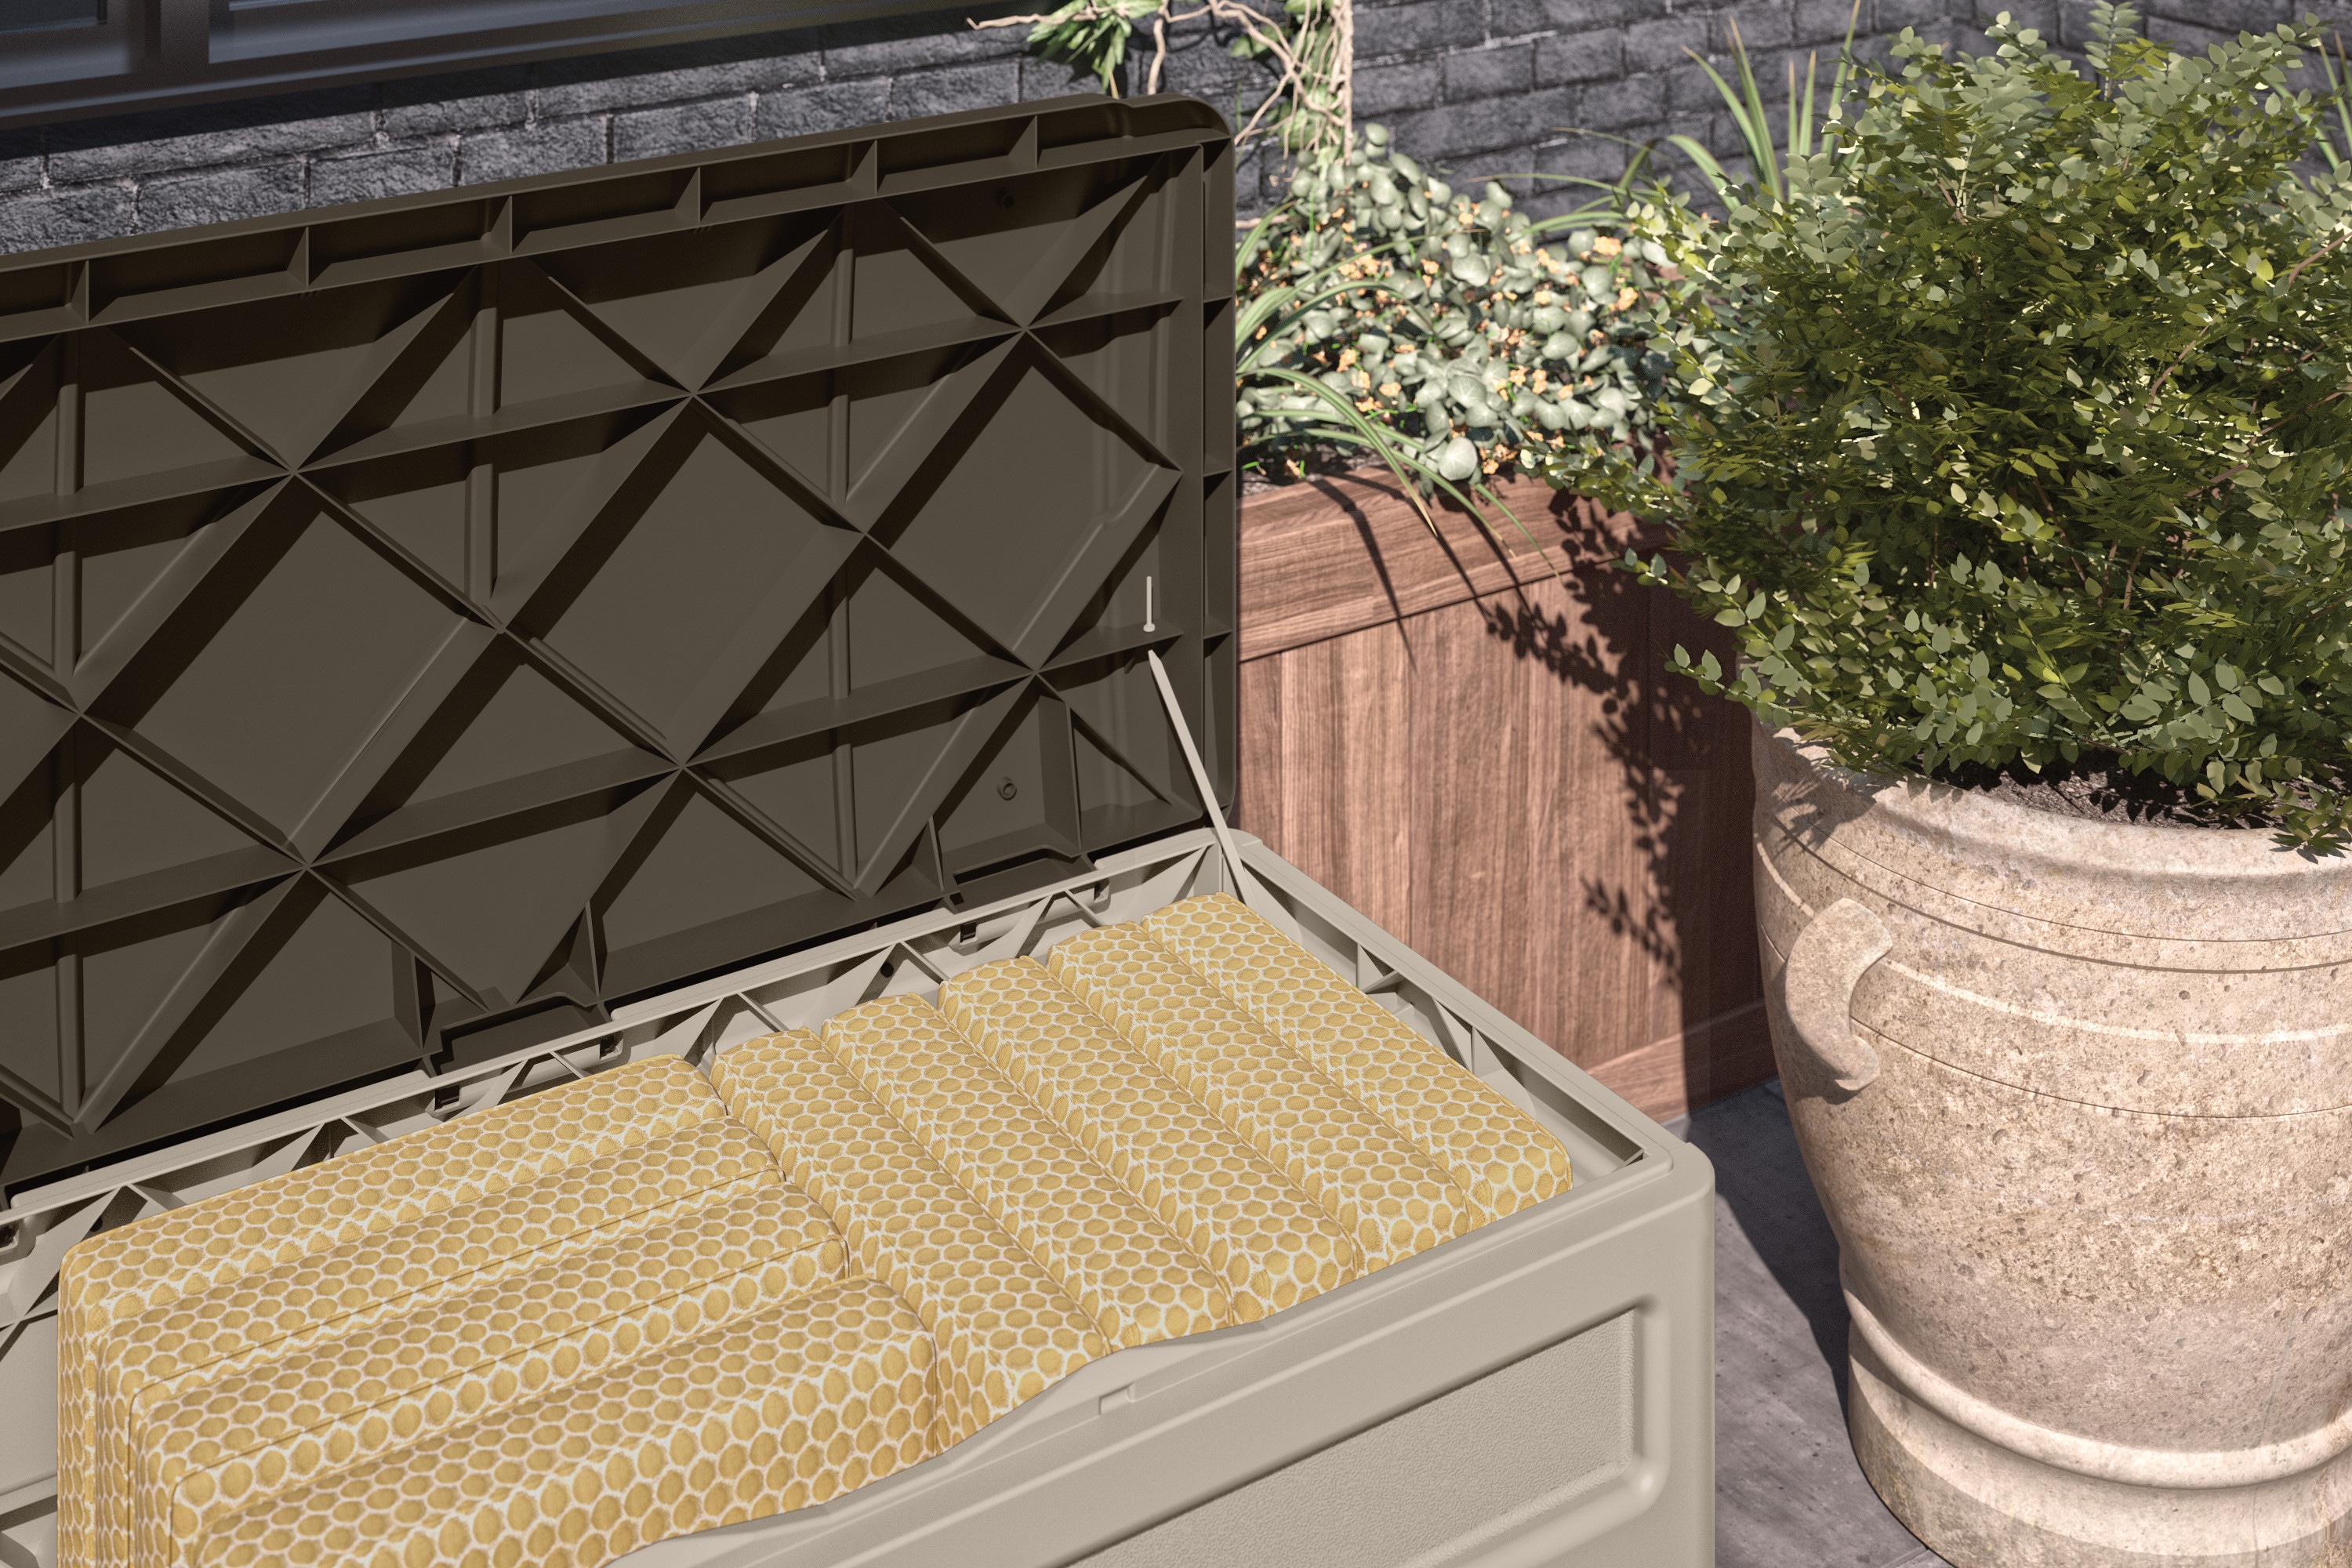 Suncast 46.125-in L x 9.75-in 78-Gallons Taupe Plastic Deck Box